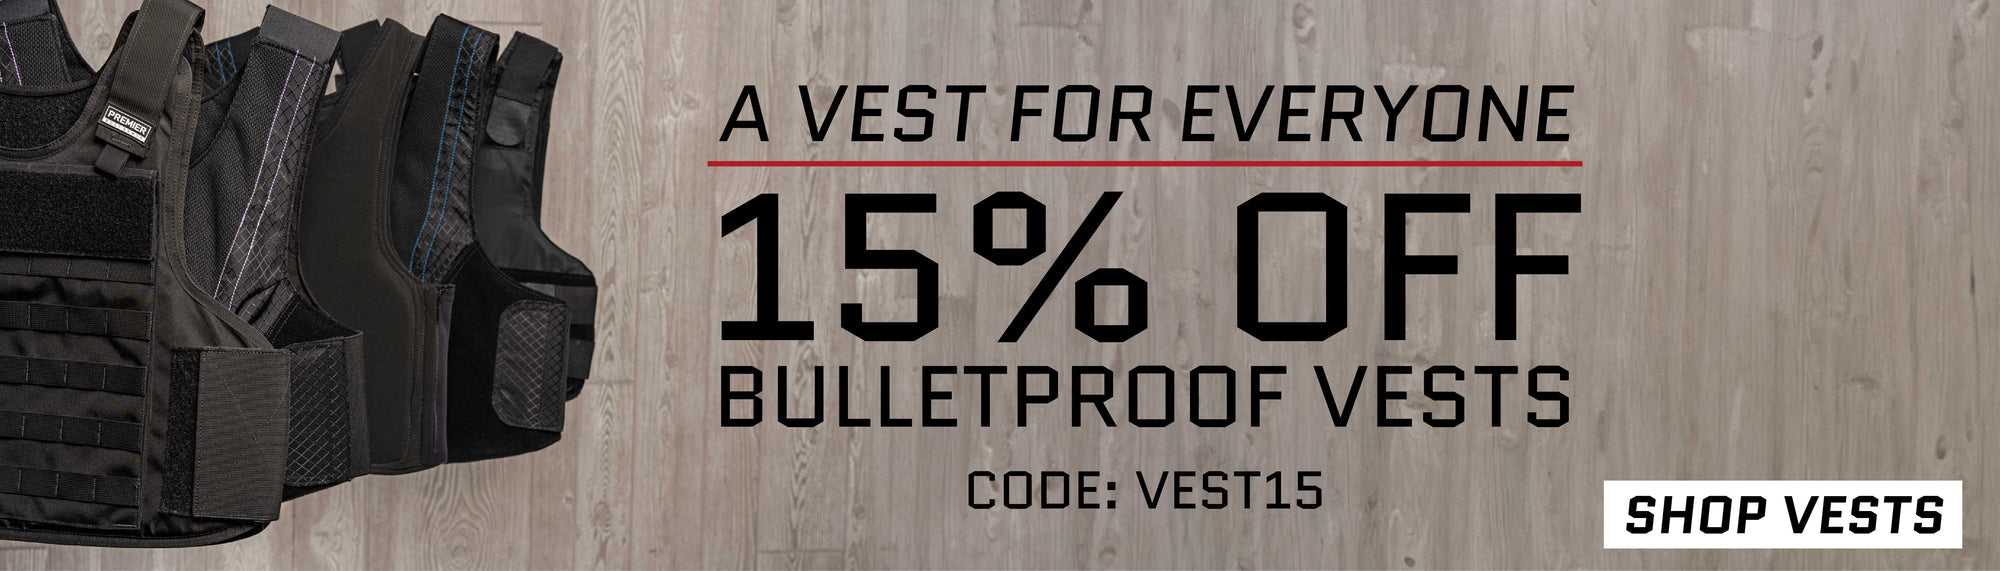 bulletproof vest sale. 15% off tactical and concealable body armor vests